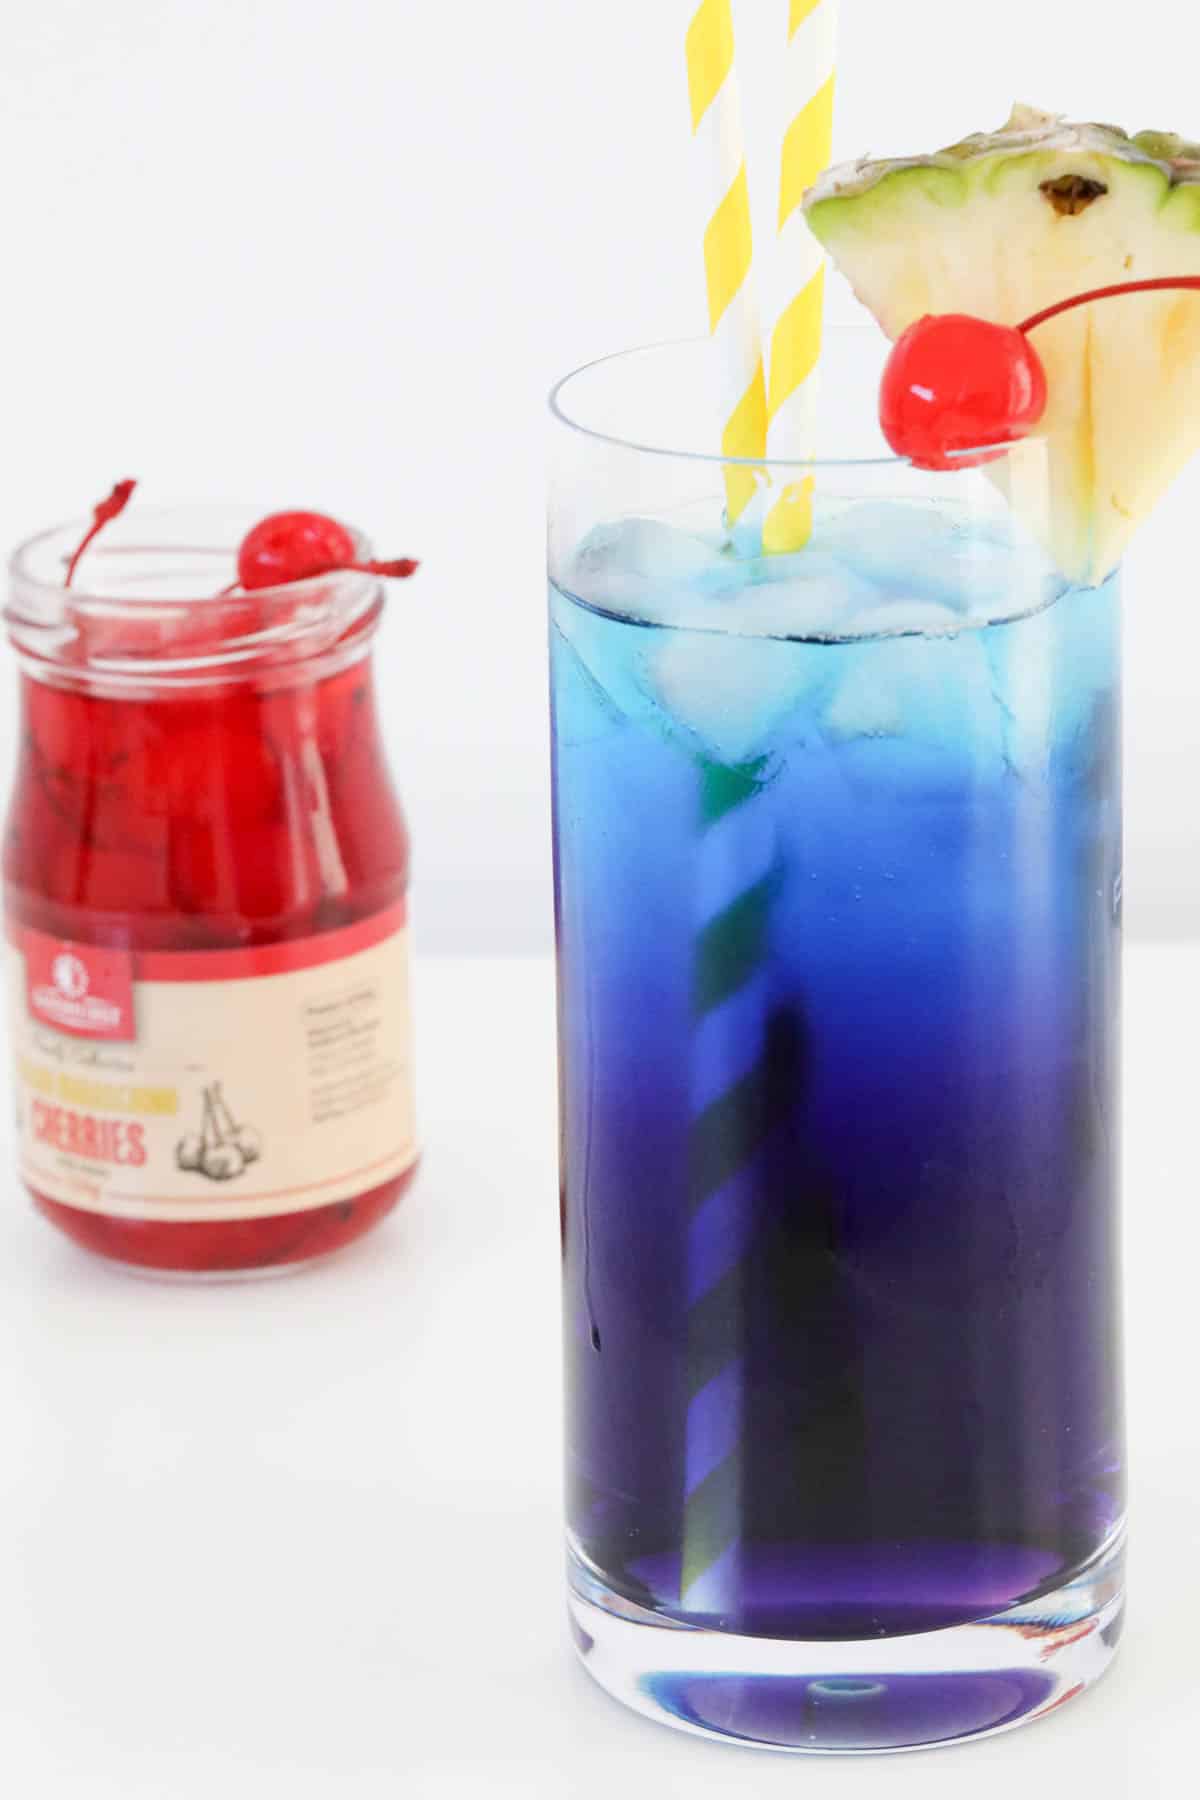 A jar of maraschino cherries behind a blue tingle cocktail.